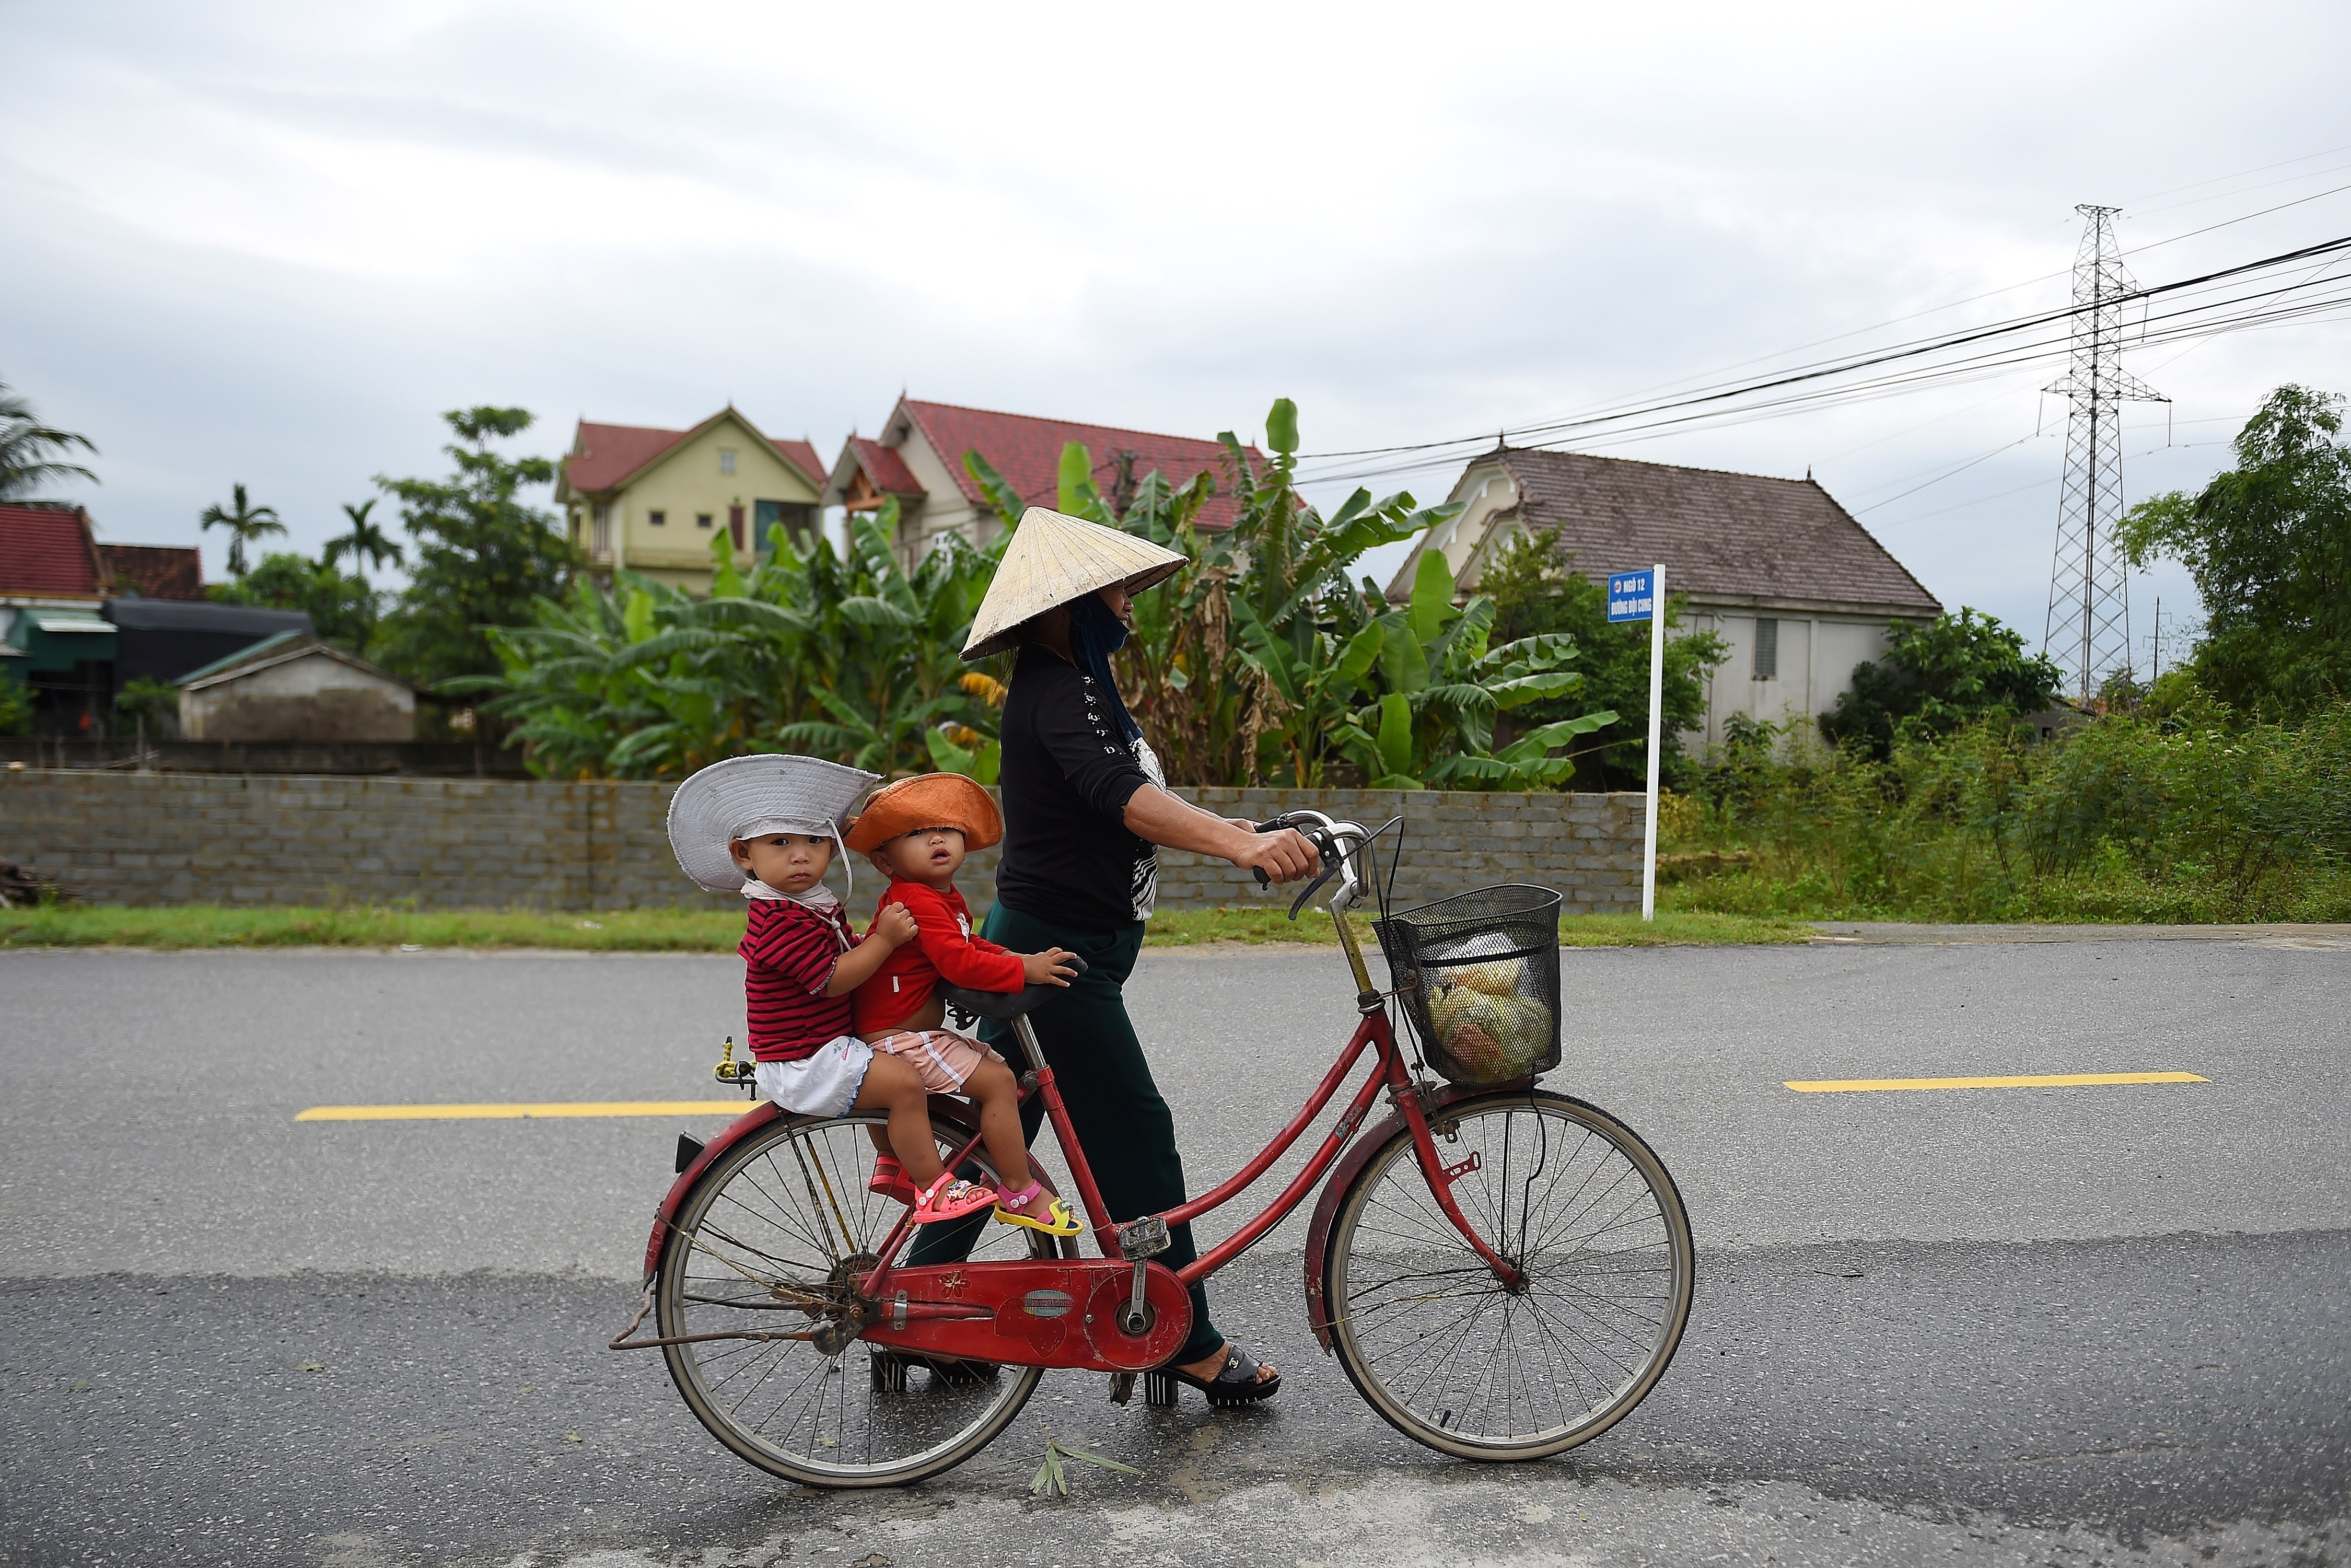 A Vietnamese woman carries children on a bicycle. Vietnam is one of the most region’s promising e-commerce markets, driven by its young population, growing middle class, high internet penetration and rising smartphone penetration. Photo: AFP